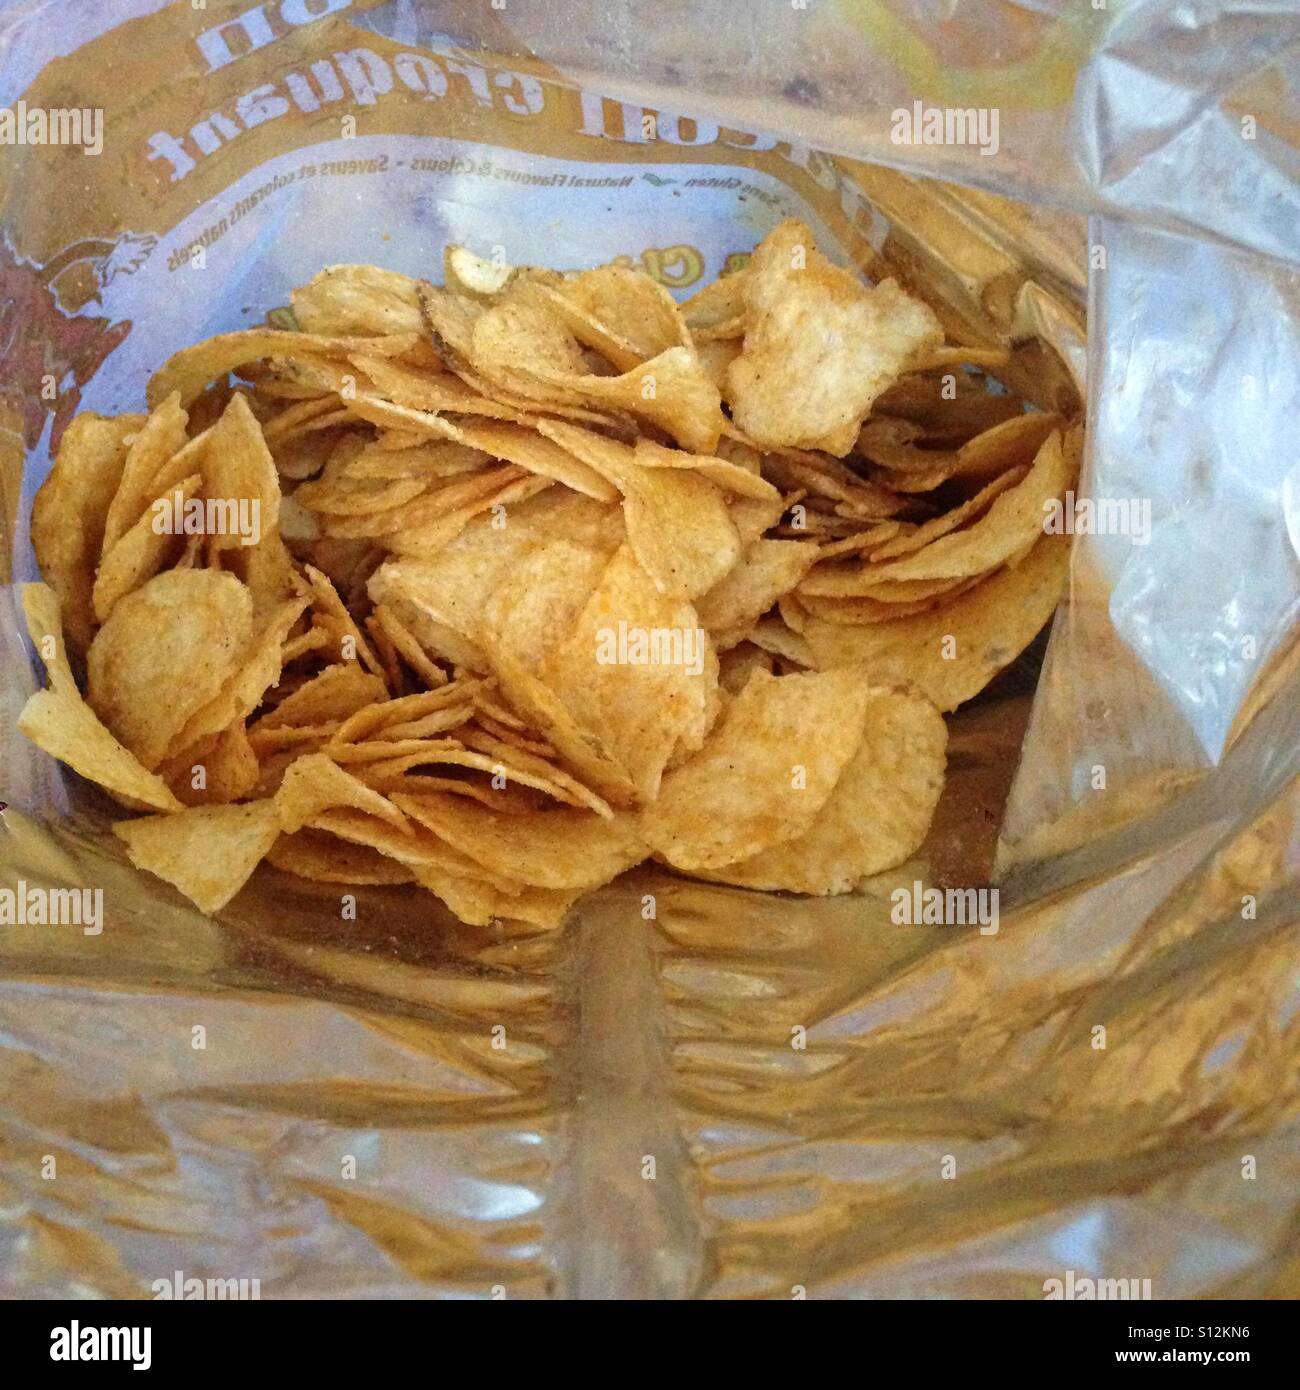 Bag Of Chips High Resolution Stock Photography and Images - Alamy